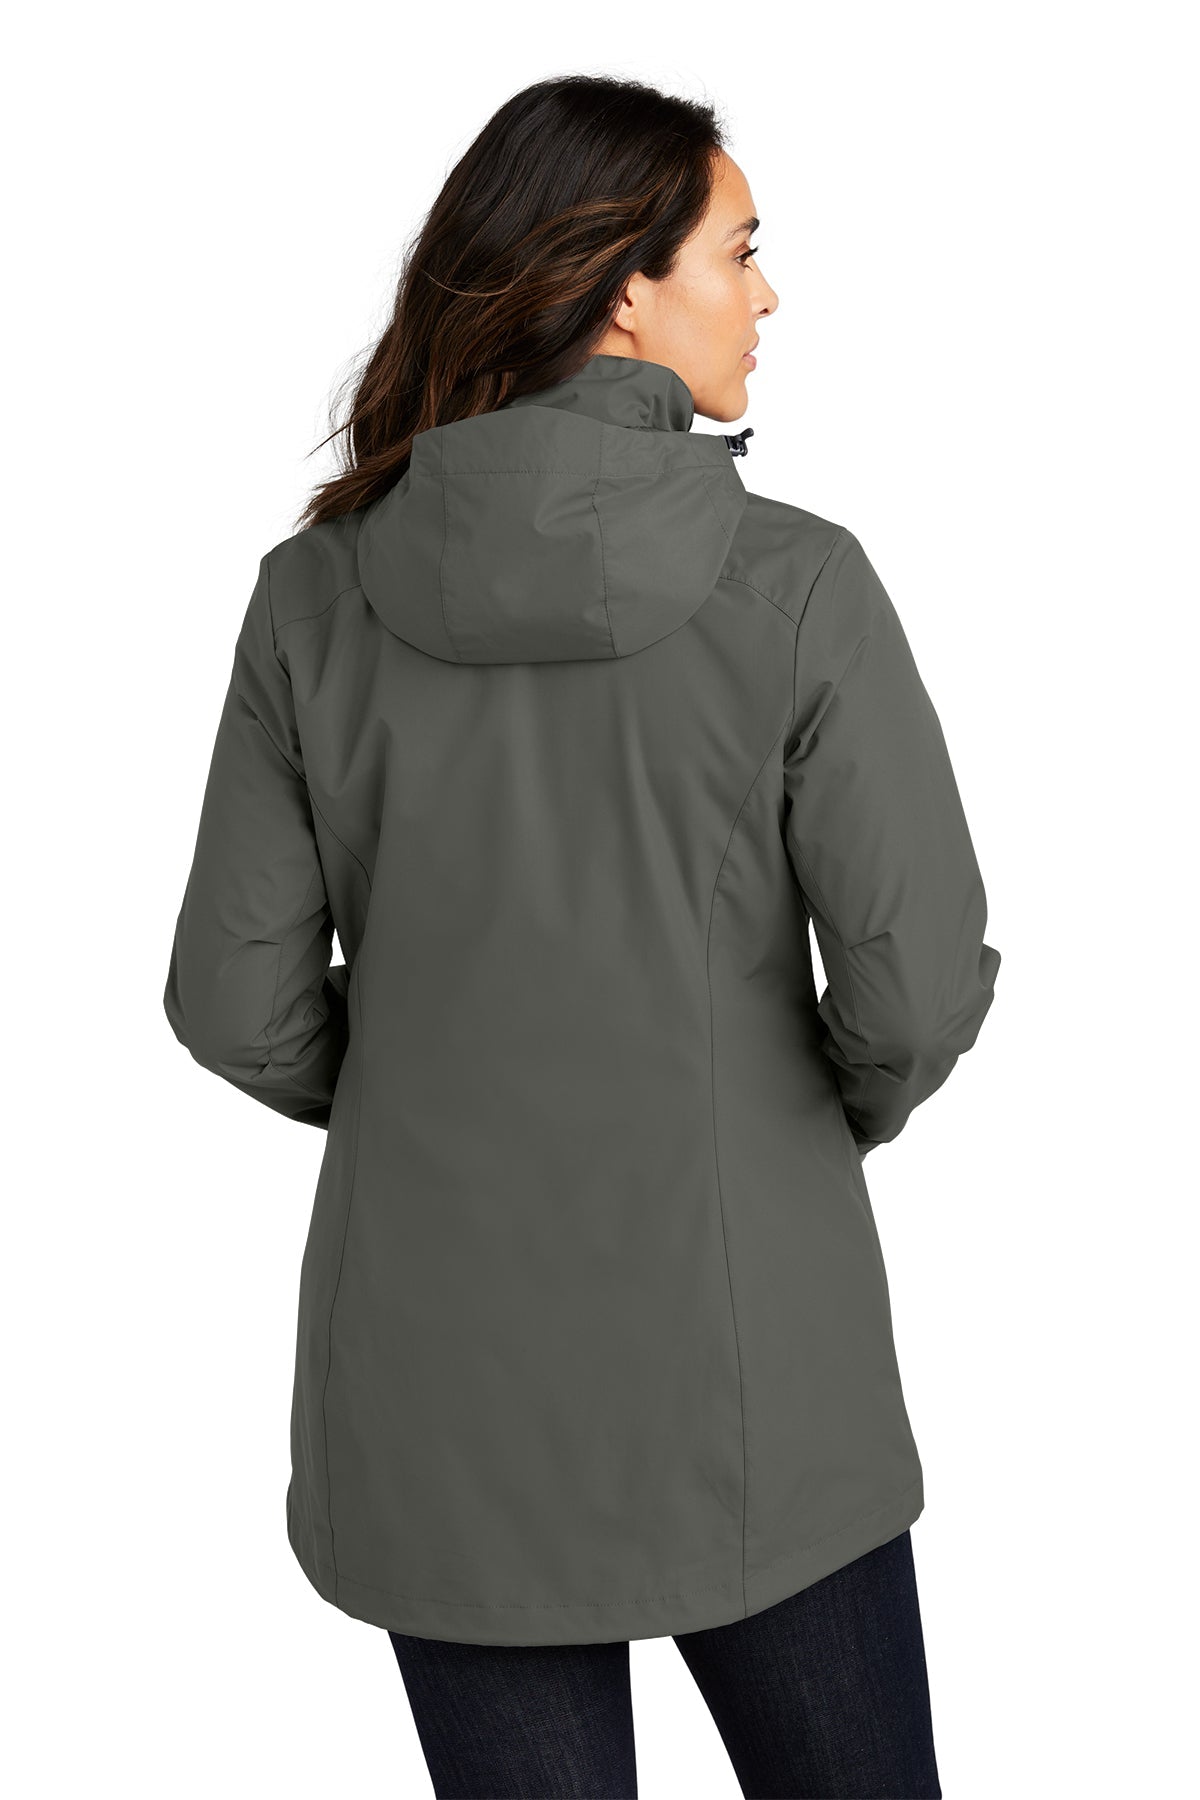 Port Authority Ladies All-Weather 3-in-1 Branded Jackets, Storm Grey